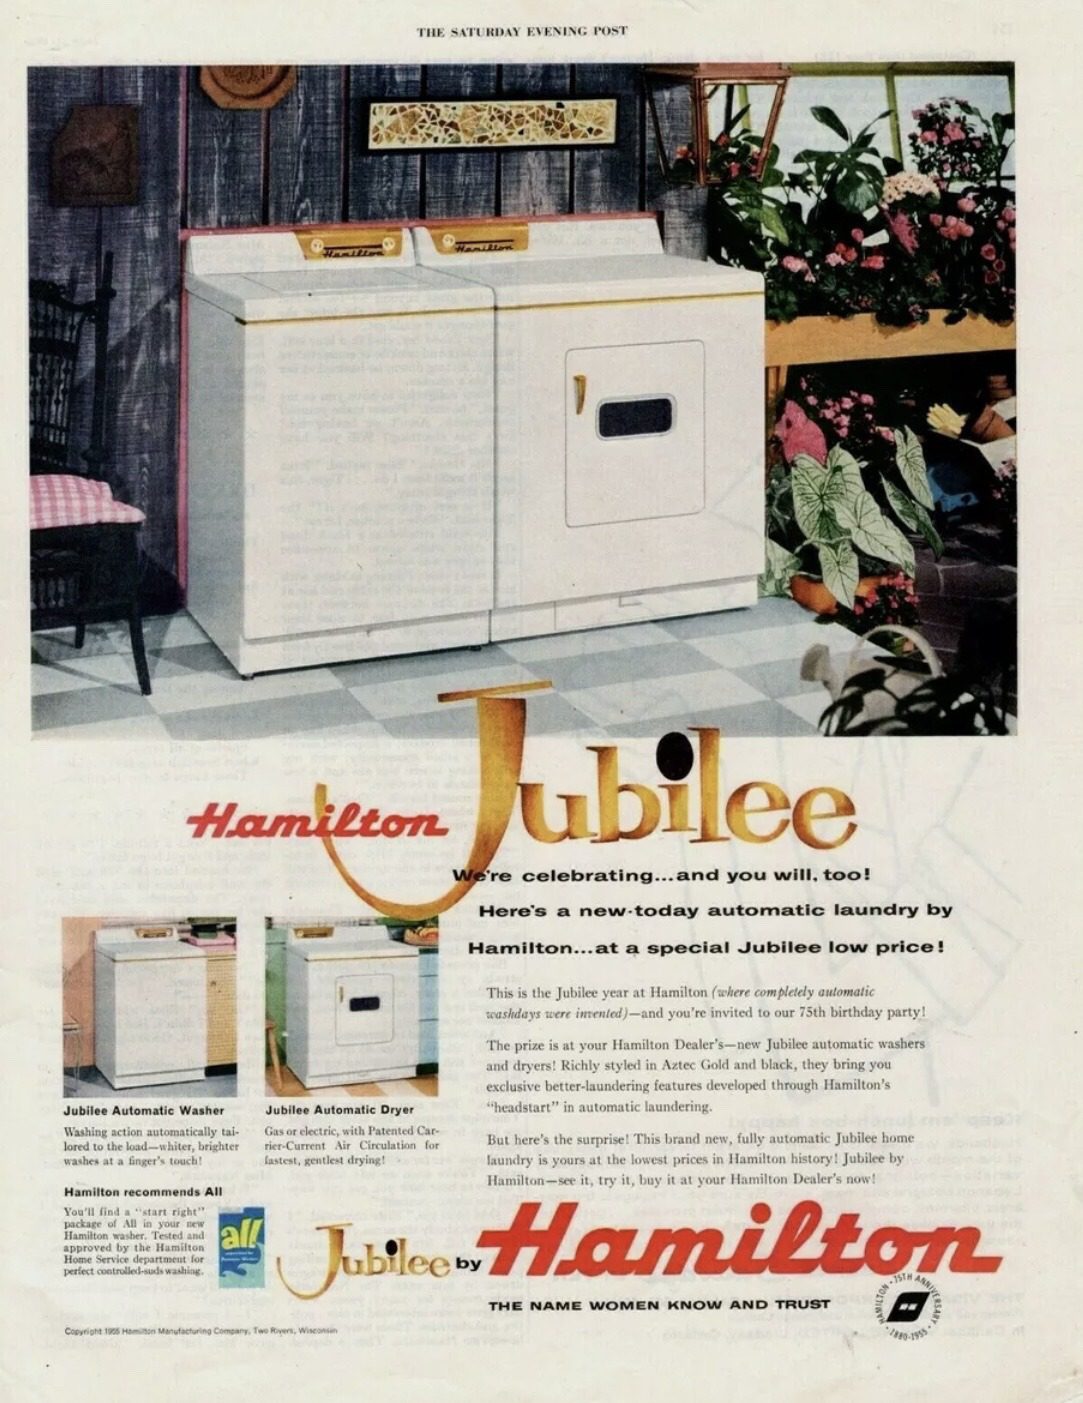 1955 Hamilton Jubilee Washer and Dryer ad